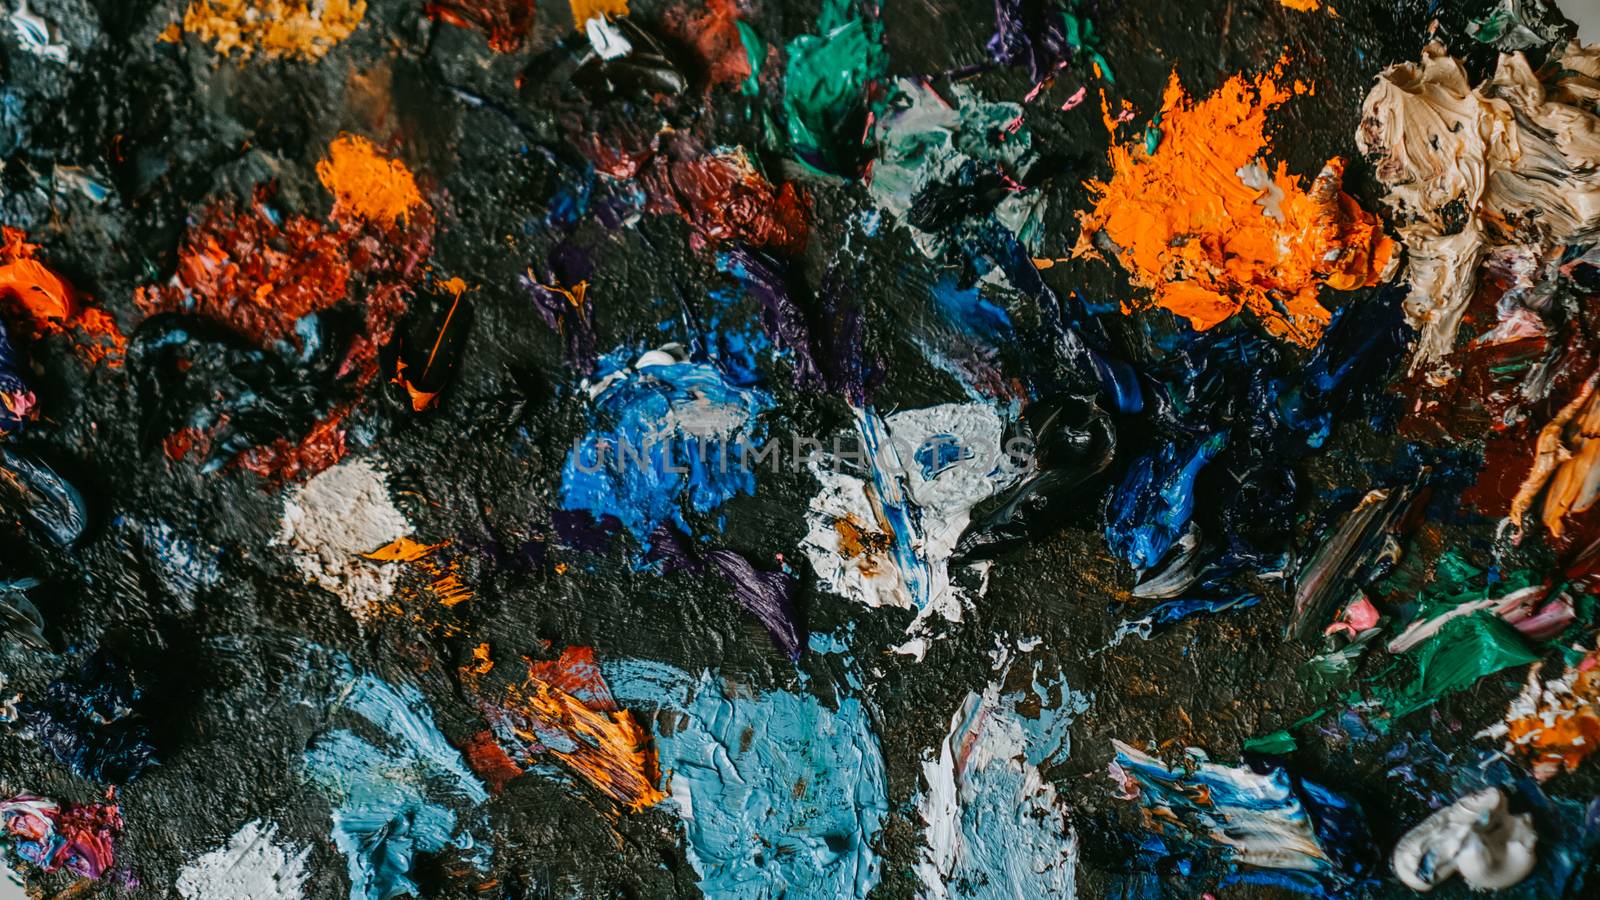 Background image of bright multi-colored oil-paint palette closeup